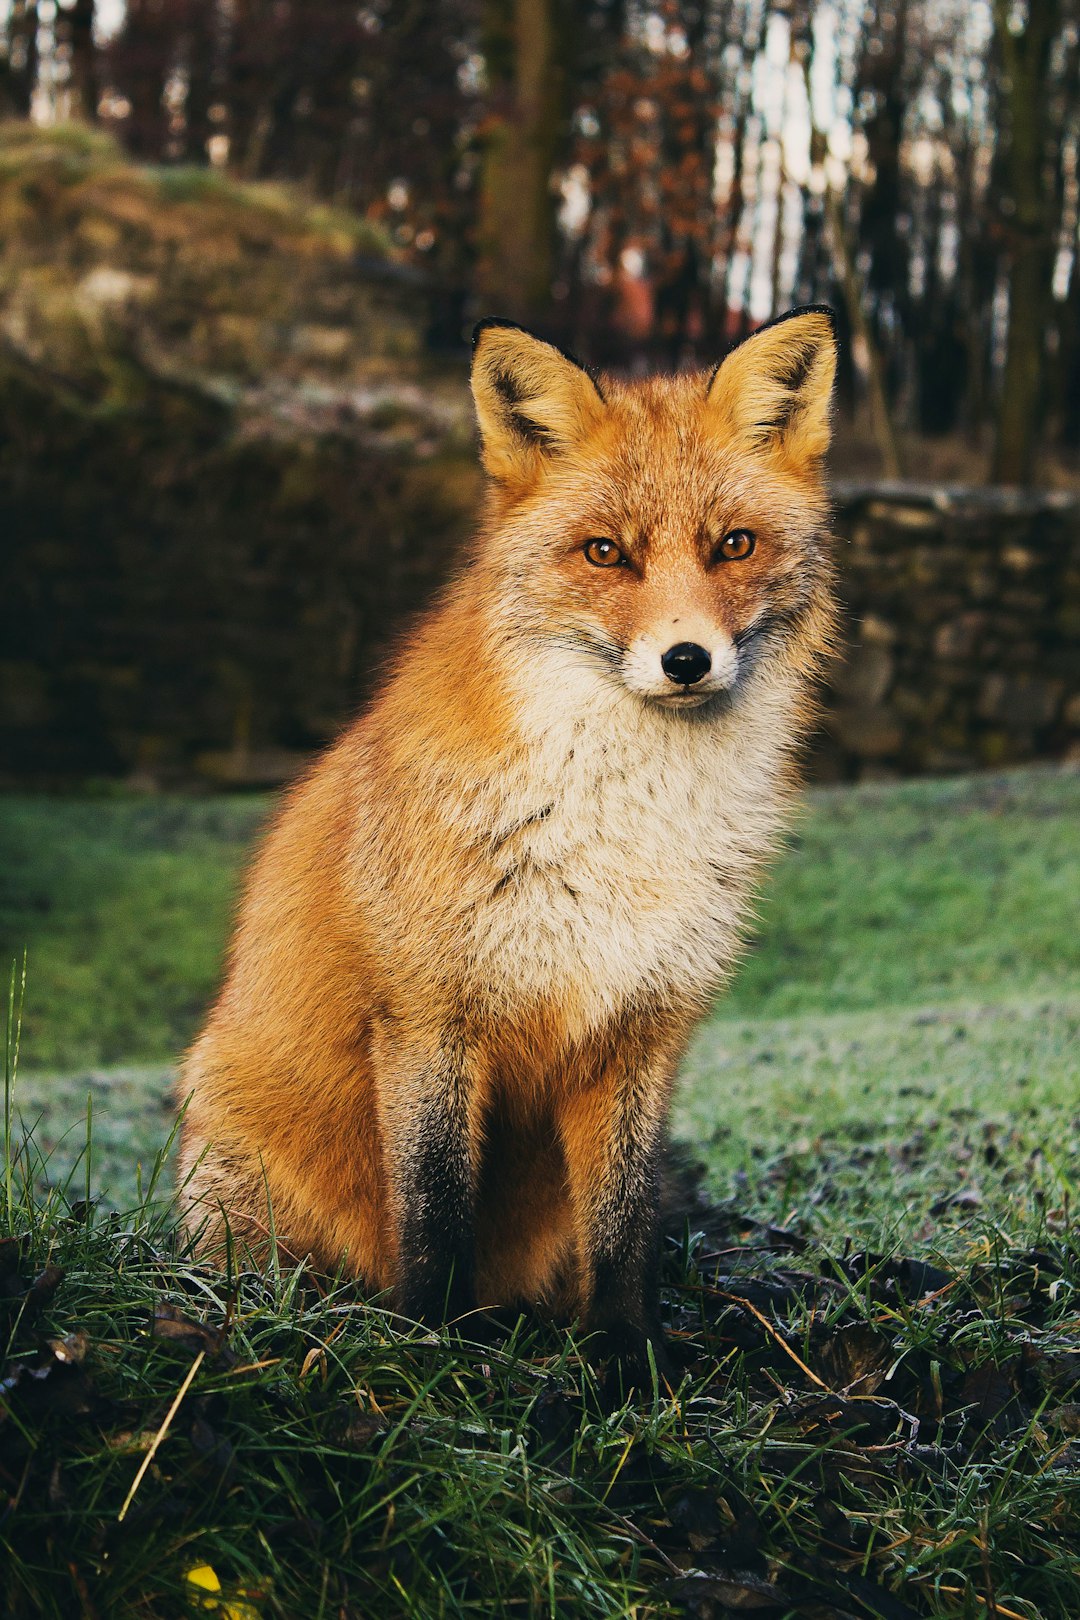 Wallpaper, animal wallpapers, animal backgrounds and fox ...